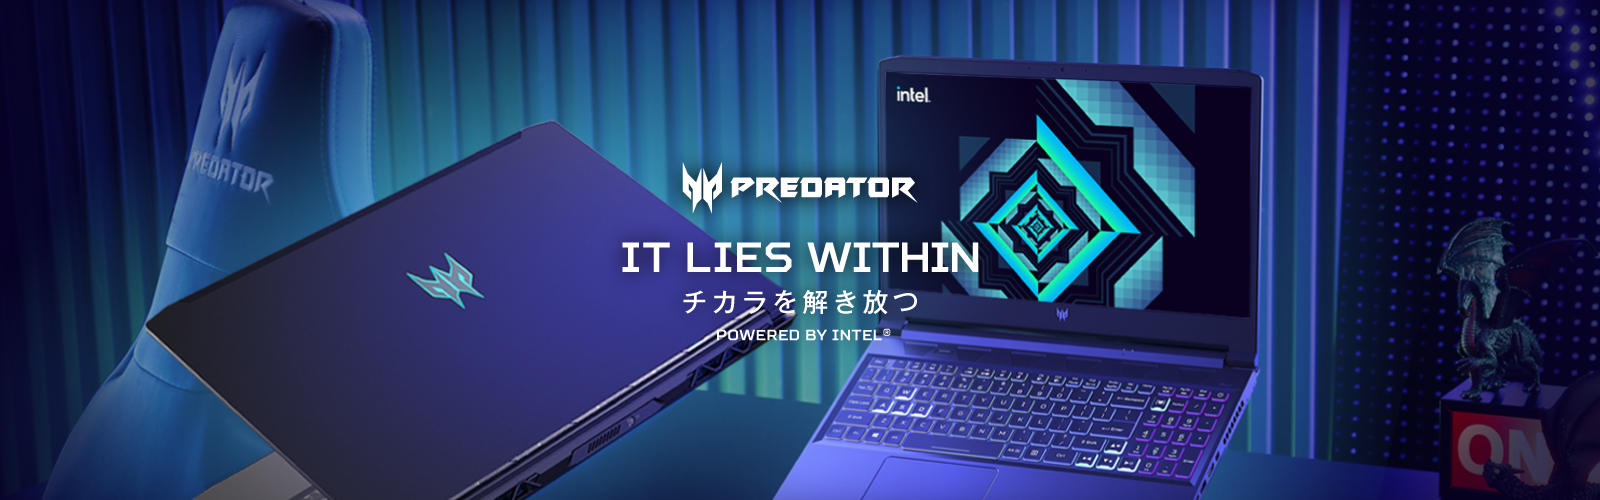 PREDATOR IT LIES WITHIN チカラを解き放つ POWERED BY INTEL®